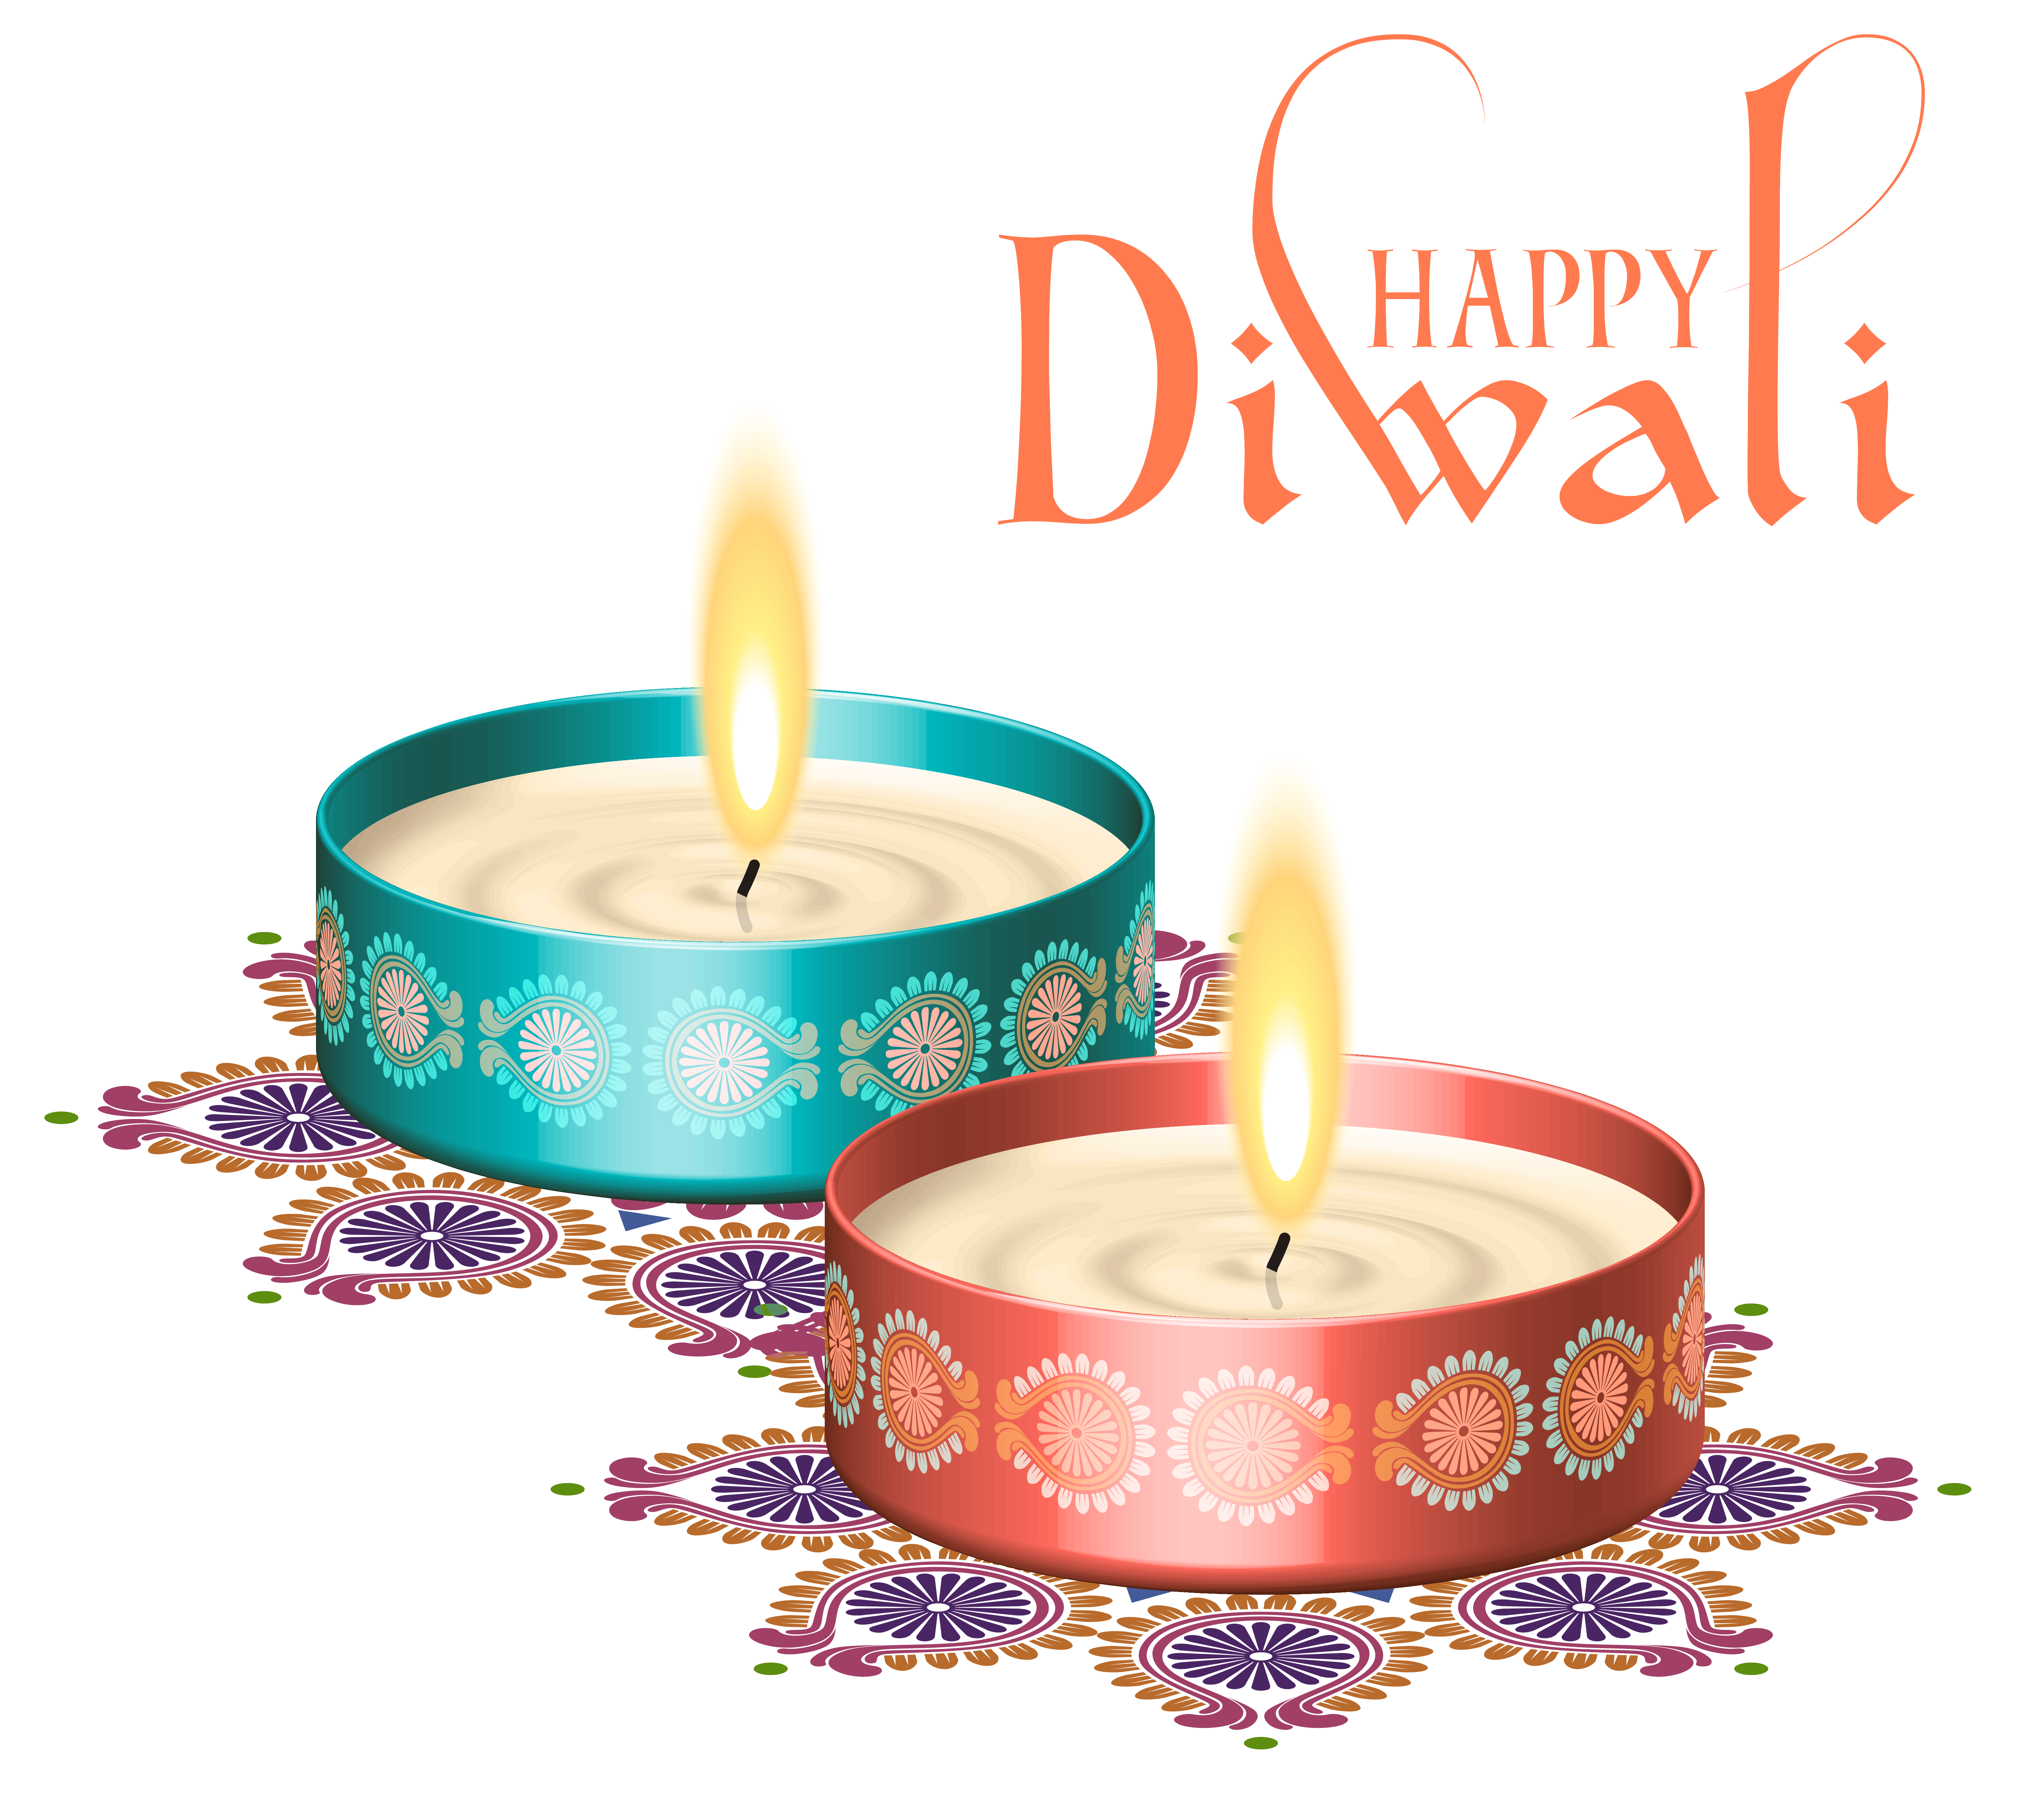 Happy nice candles png. 2016 clipart diwali